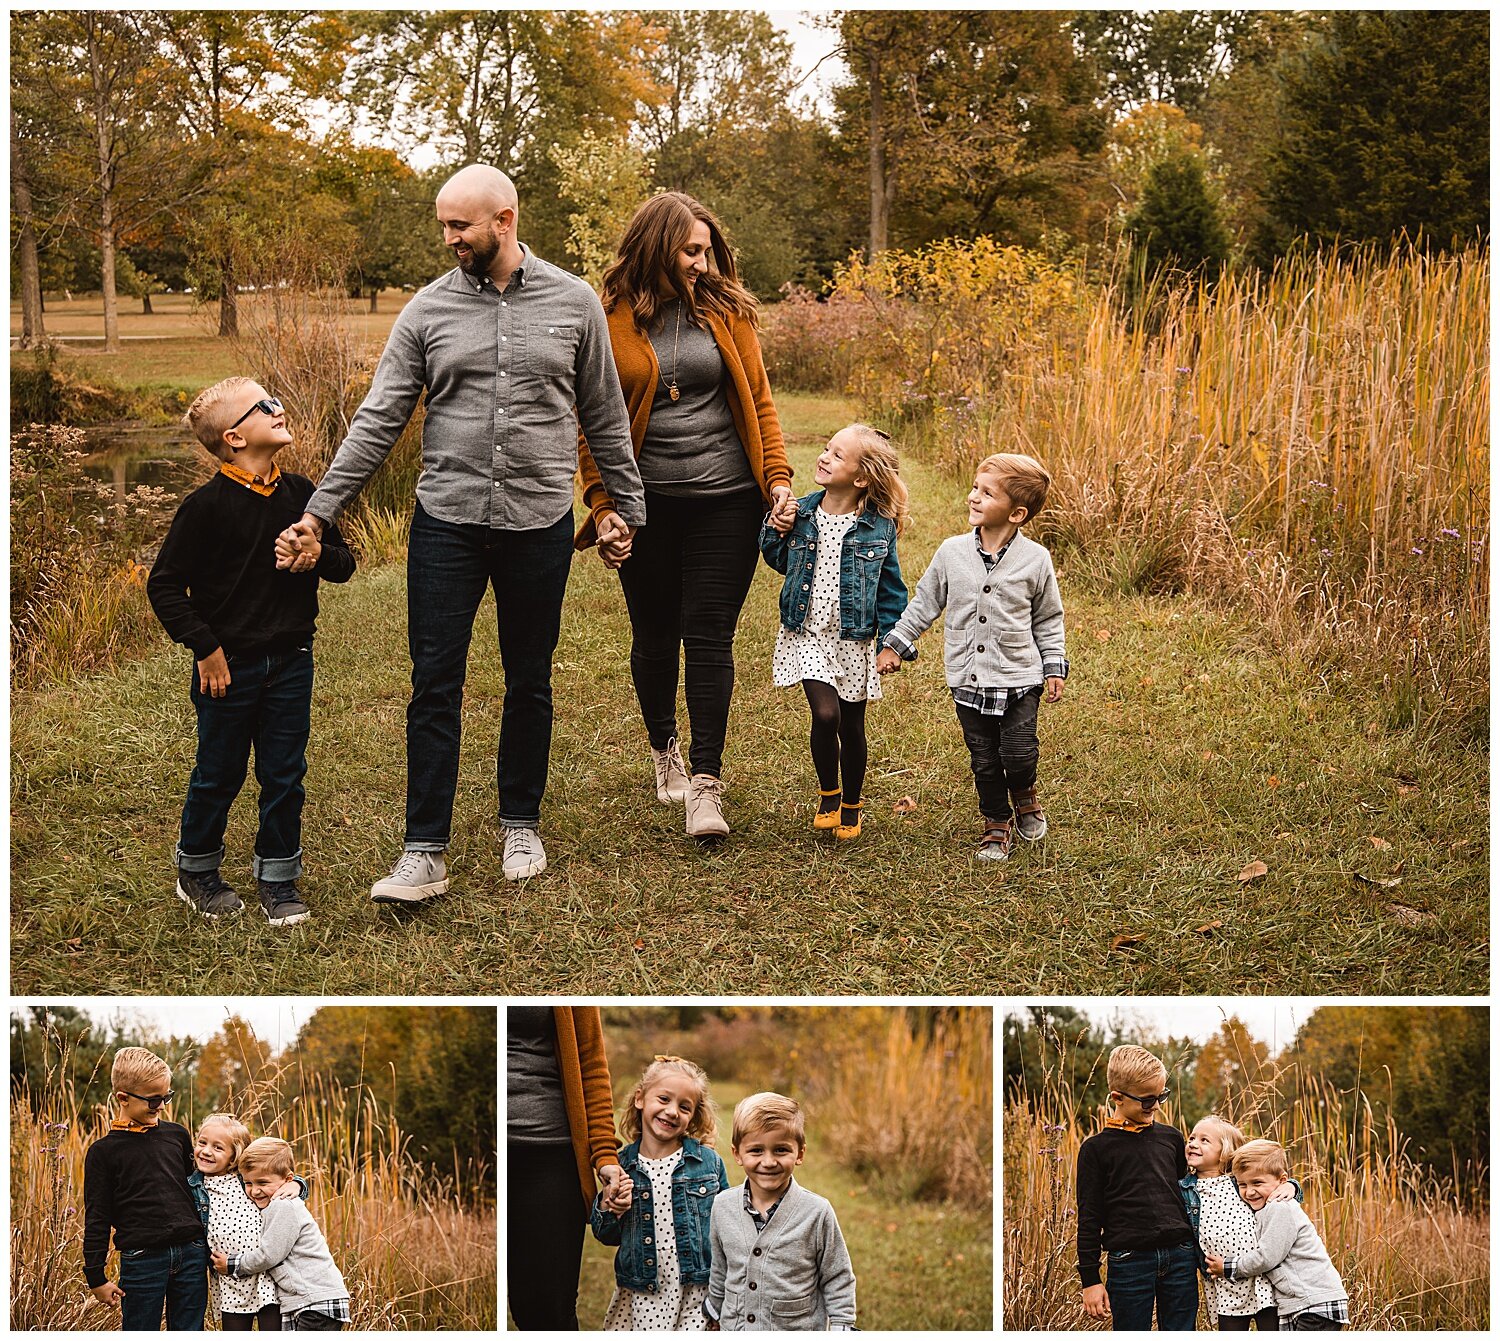 Indiana Extended Family Photography Session at Southeastway Park